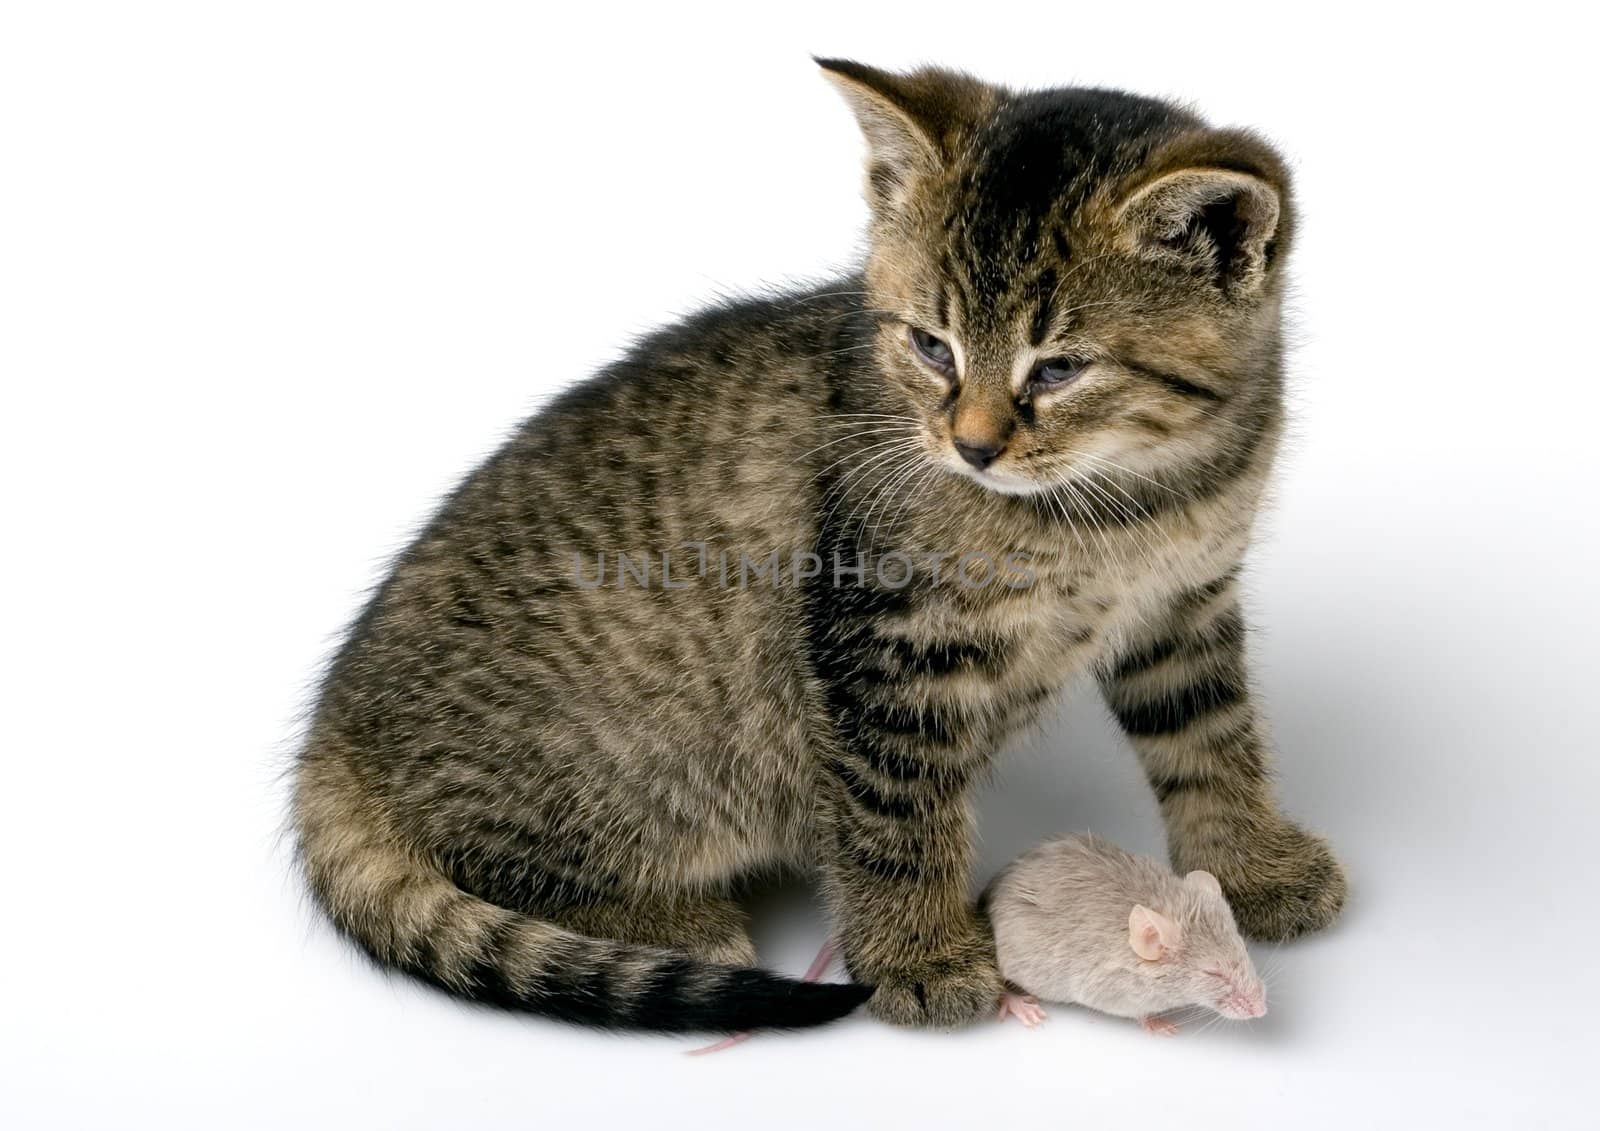 Child cat and grey mouse on white background